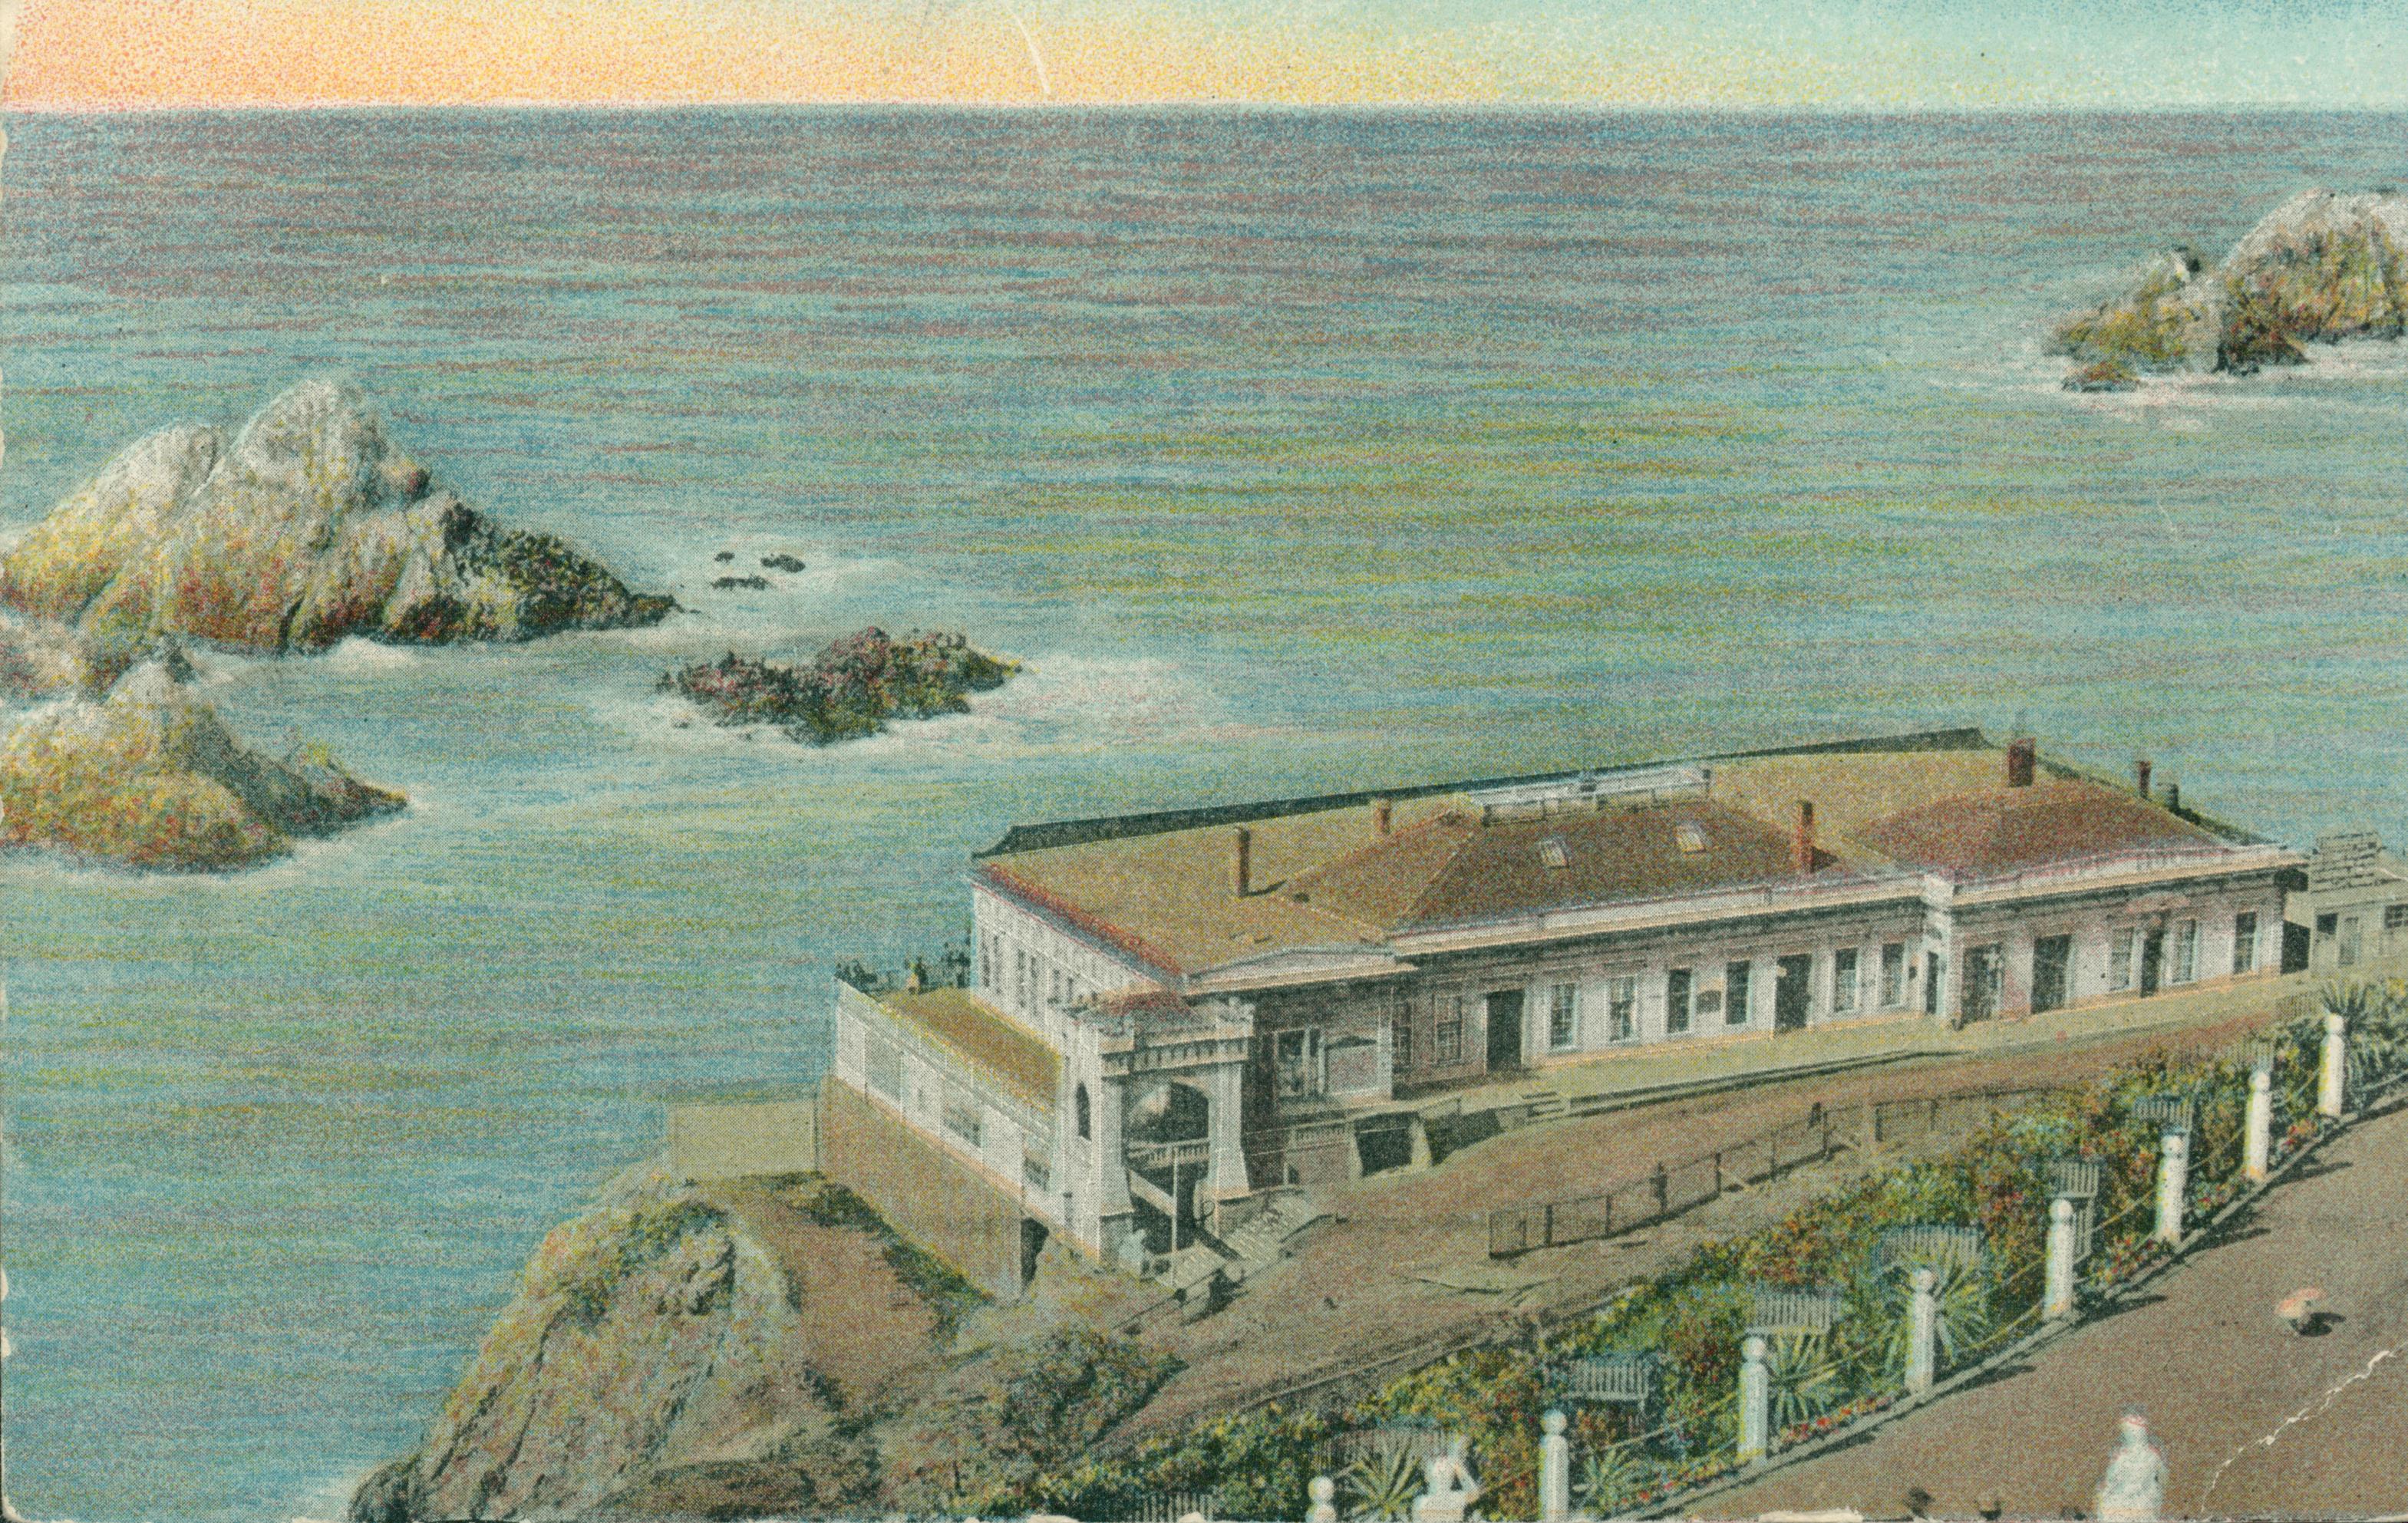 Shows the Cliff House and Seal Rocks, with the statues on Sutro Heights in the foreground.